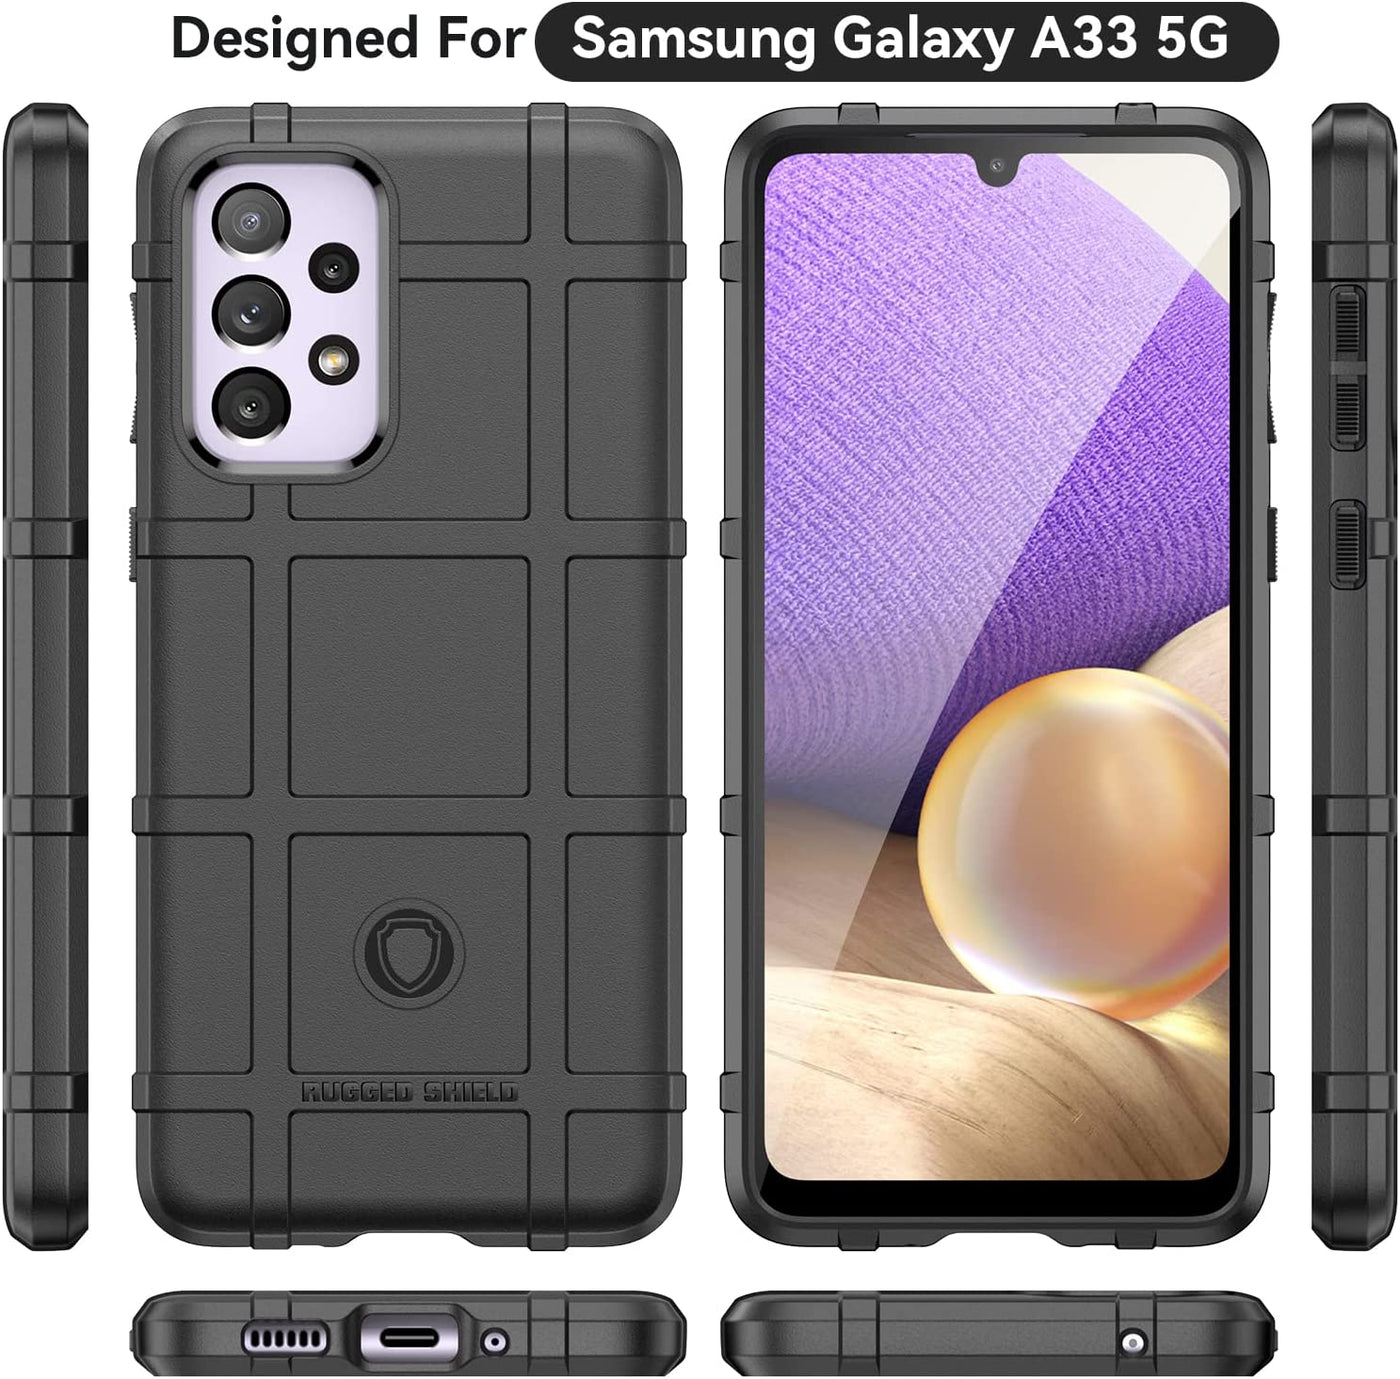 Samsung Galaxy A33 back case cover with camera protection